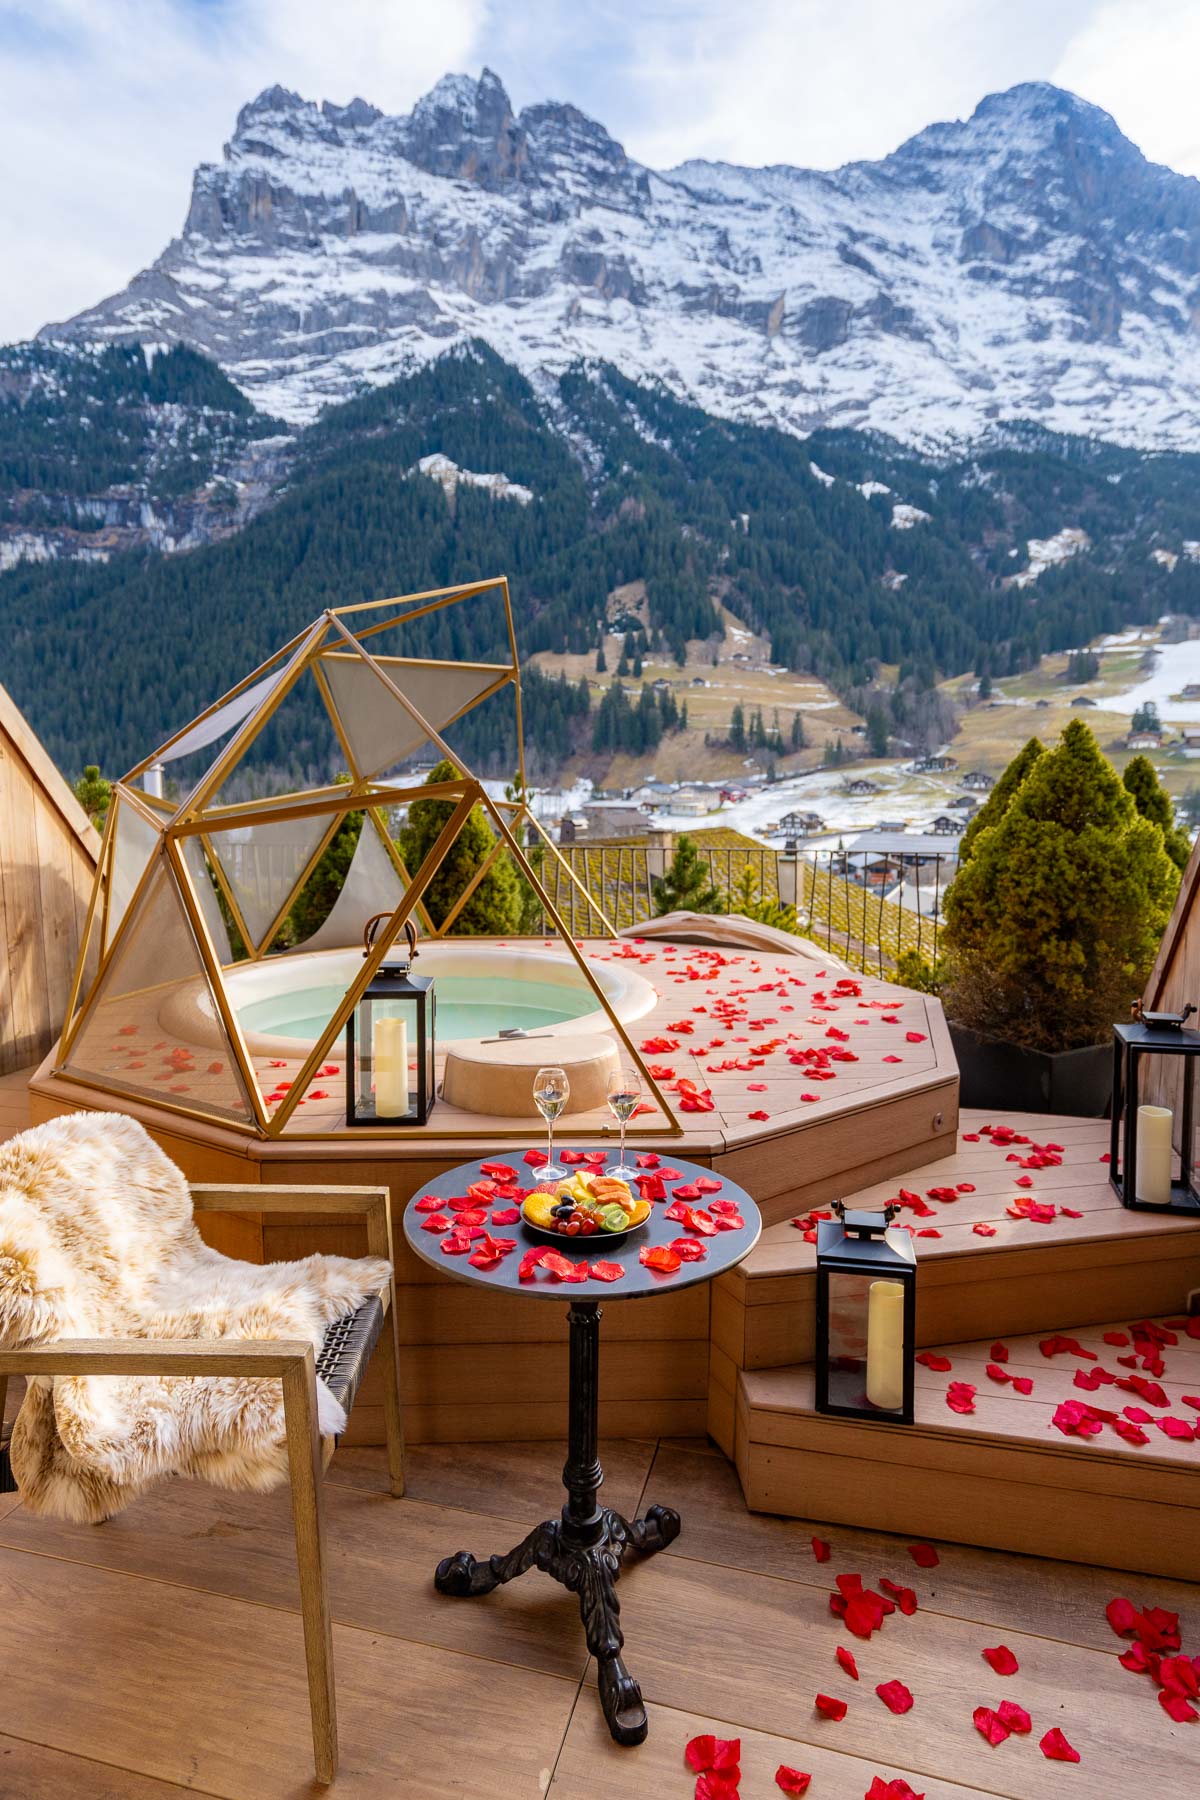 Outdoor hot tub of the Signature Room at Boutique Hotel Glacier